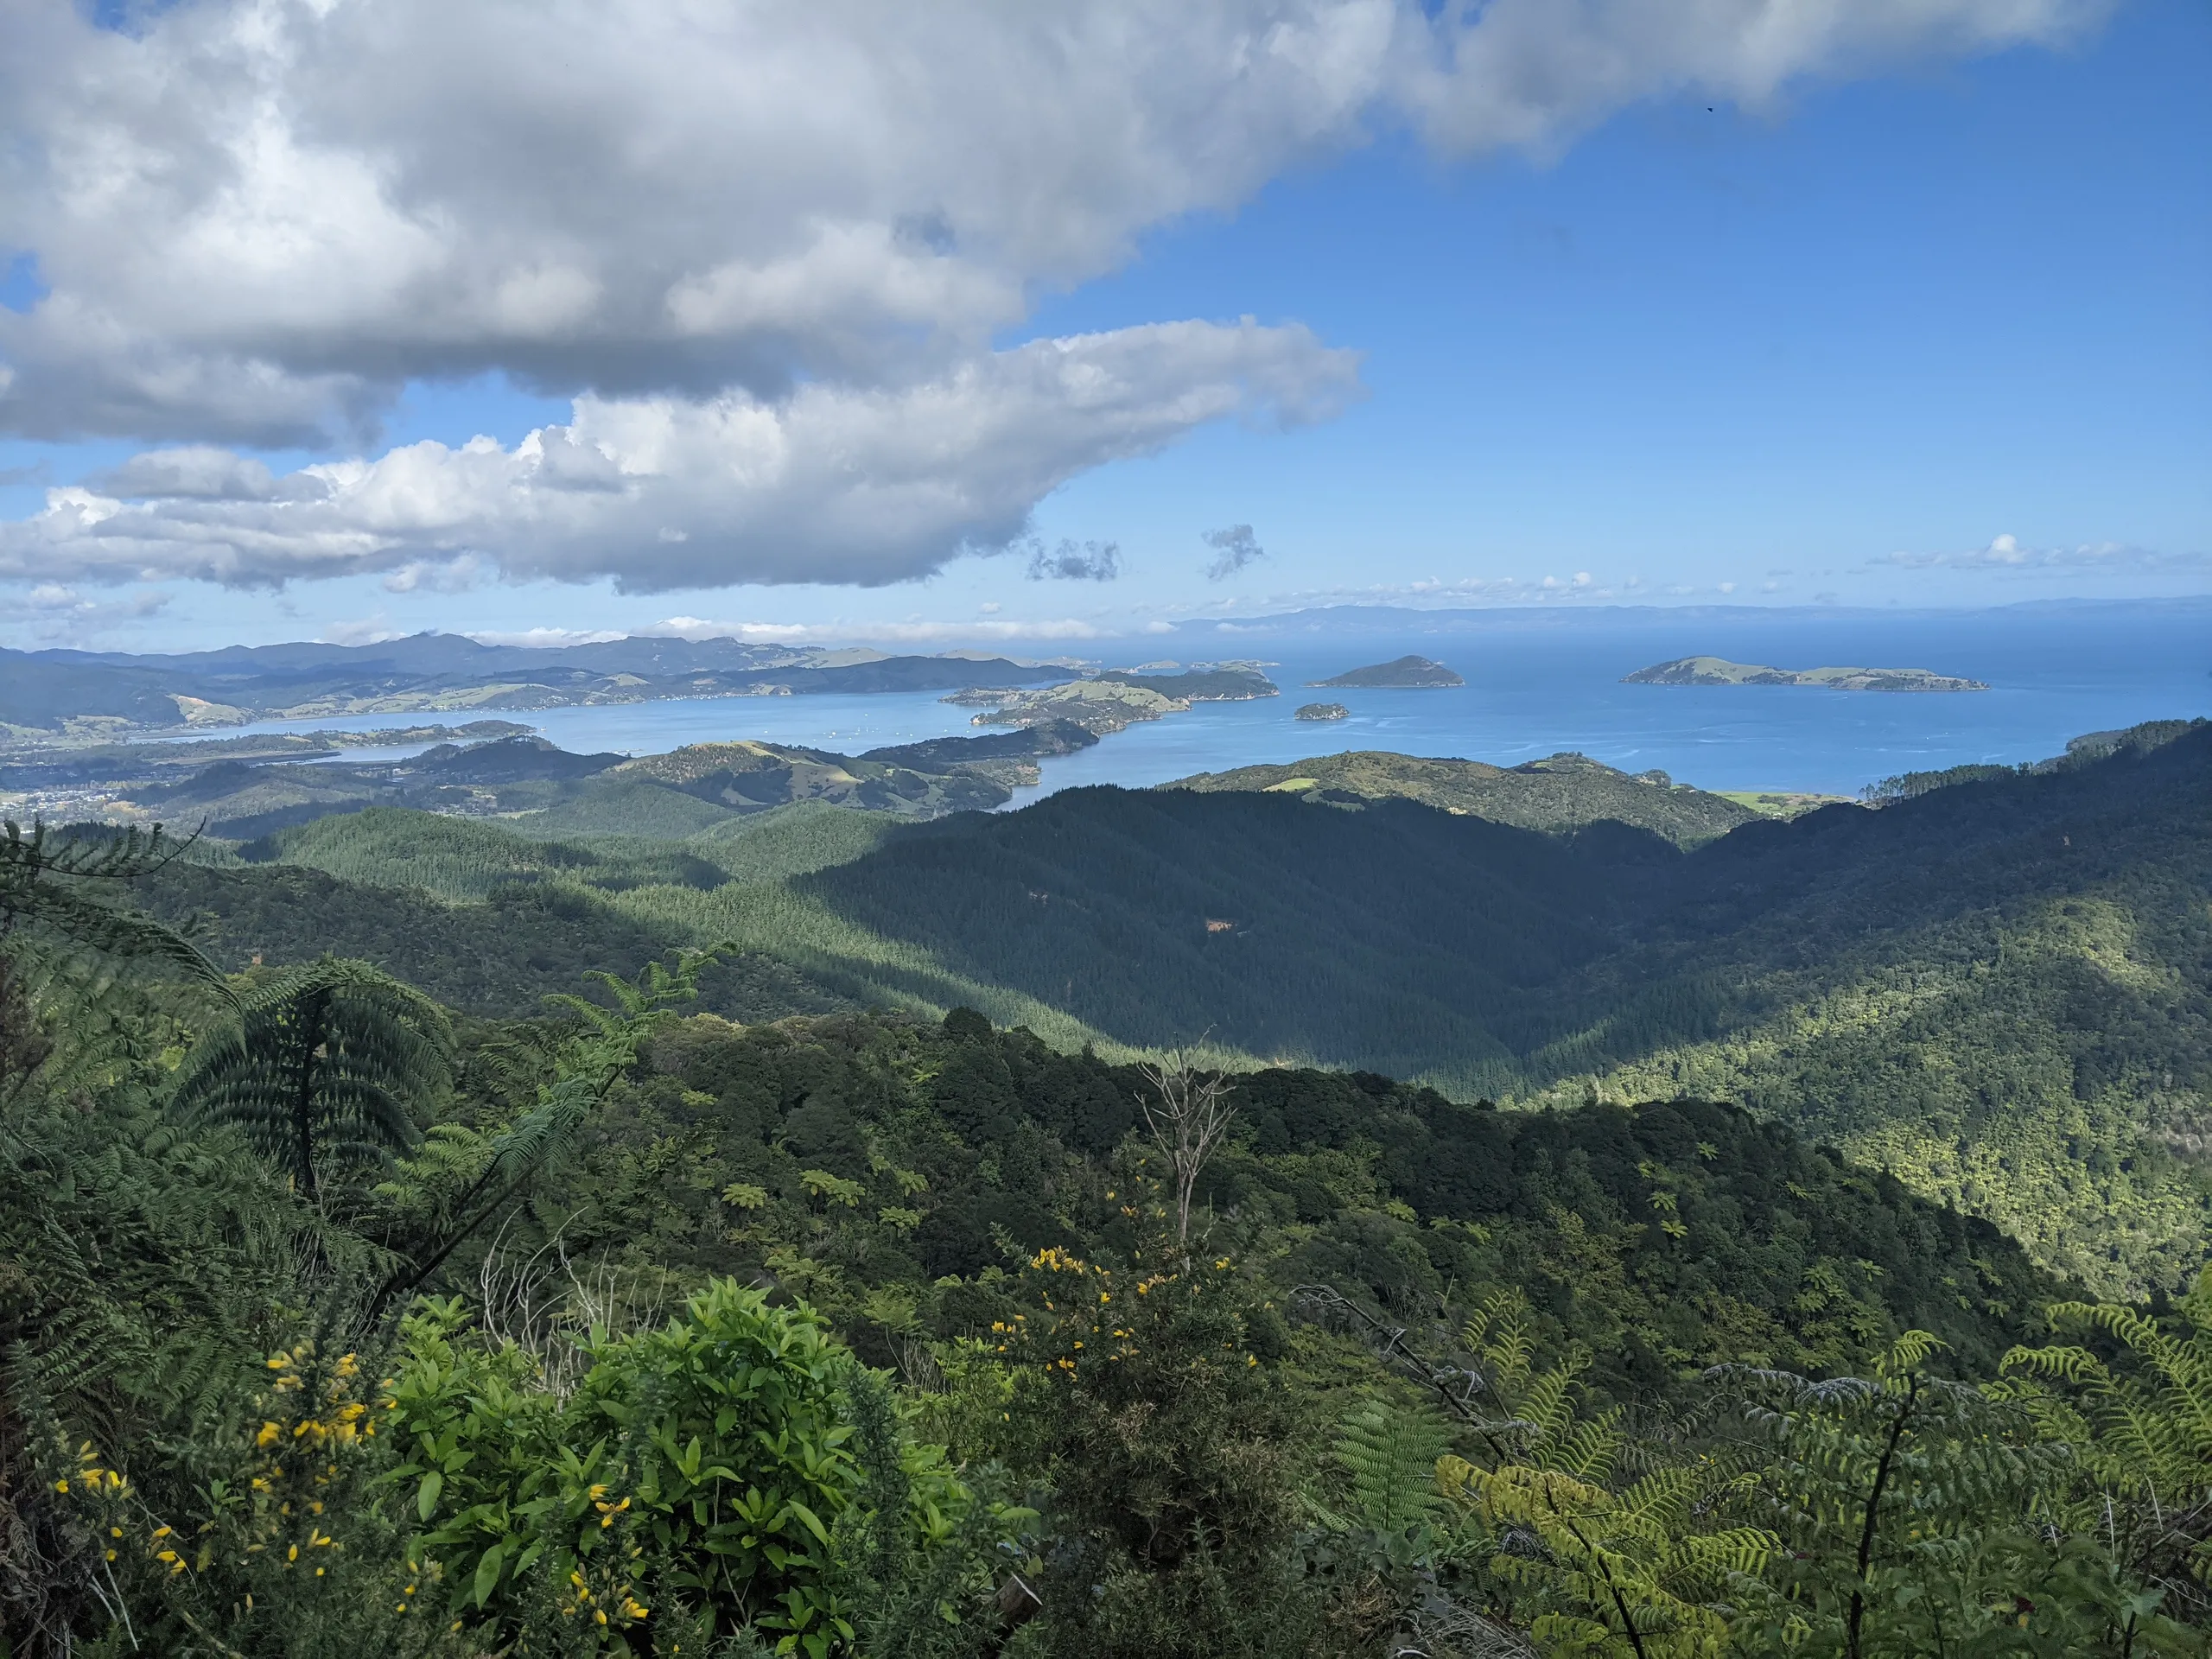 Looking west from the ridgeline trail. This was my first trip to the region; the scenery reminds me of a warmer, busier Marlborough Sounds.